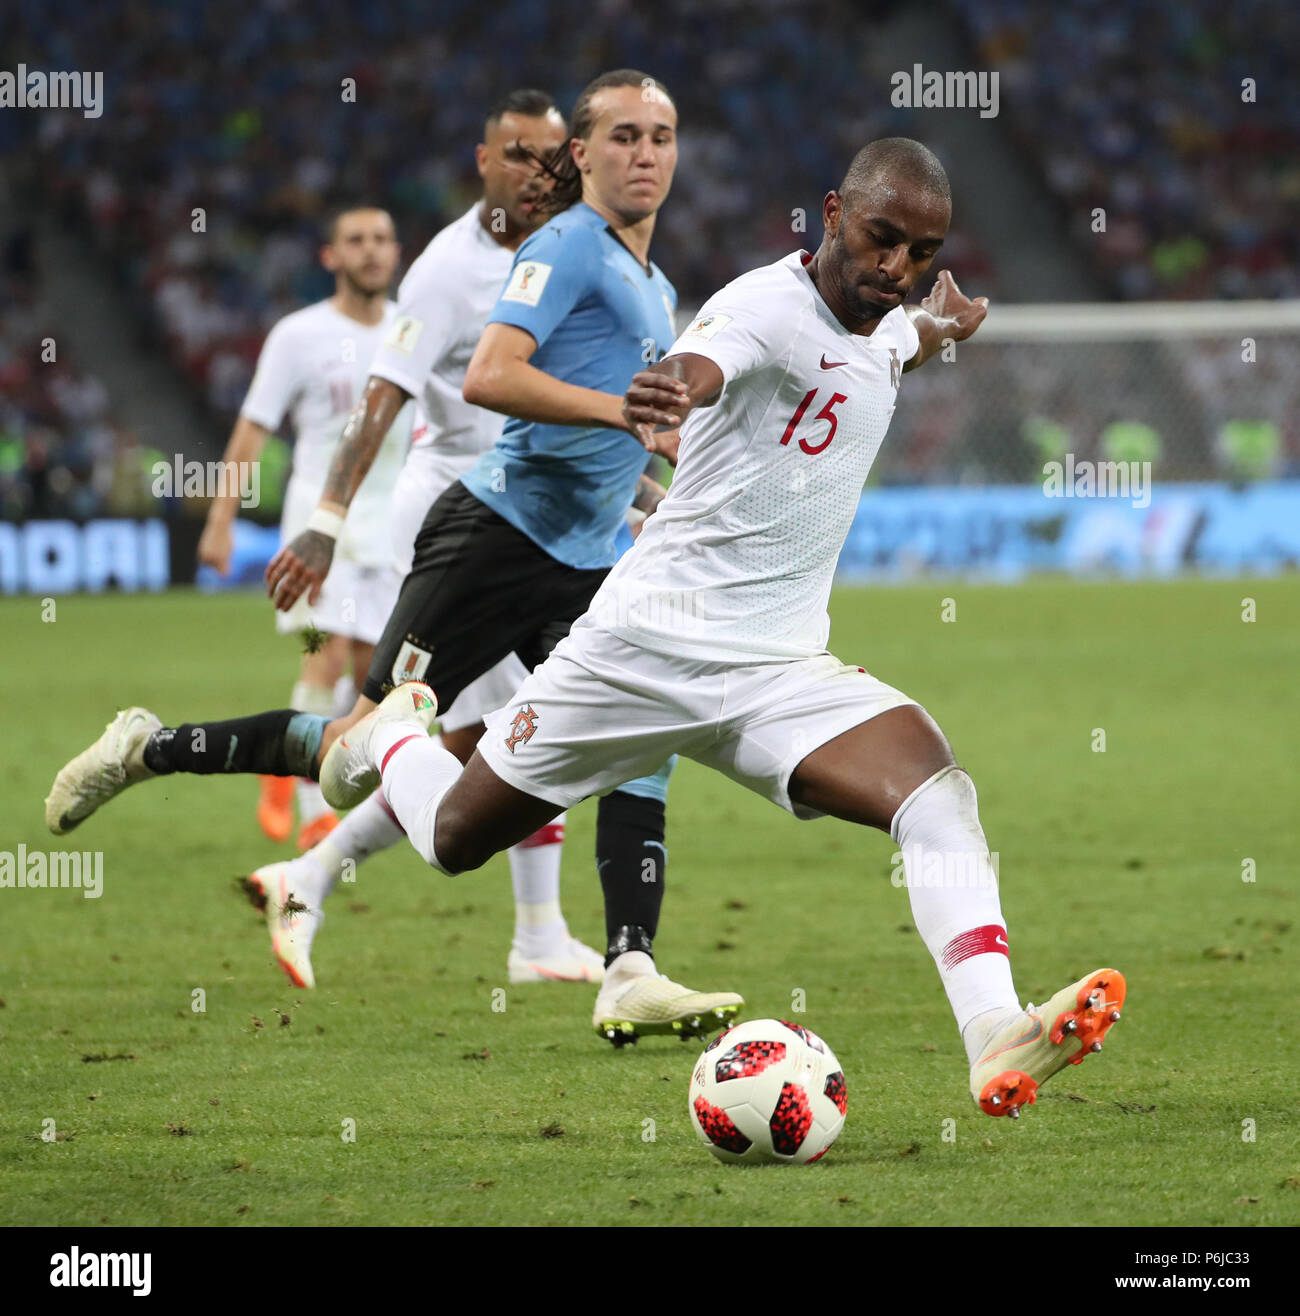 Sochi Russia 30th June 2018 Ricardo Pereira 1st R Of Portugal Competes During The 2018 Fifa World Cup Round Of 16 Match Between Uruguay And Portugal In Sochi Russia June 30 2018